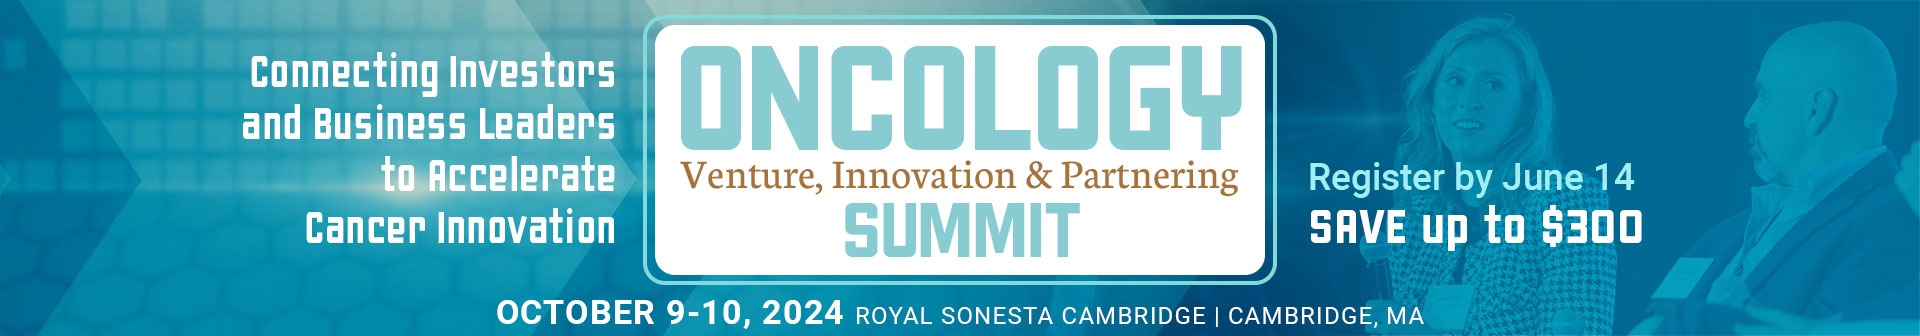 Oncology Venture Summit Banner Image